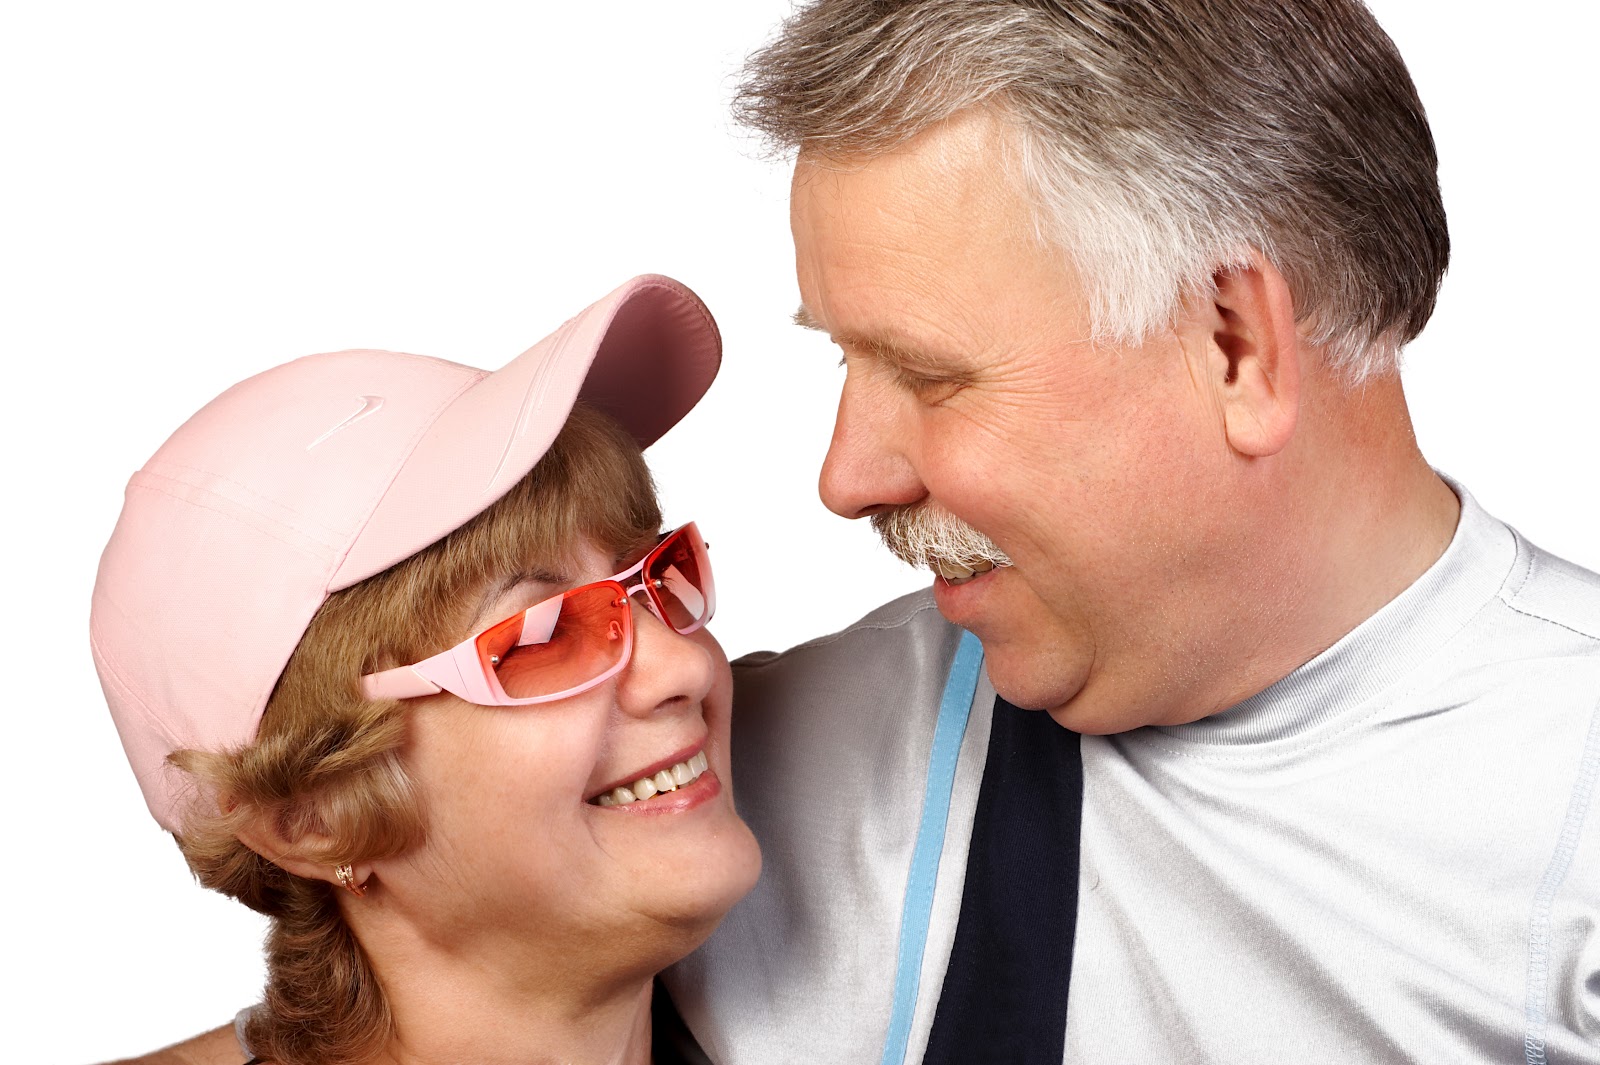 Best Online Dating Service For Women Over 50